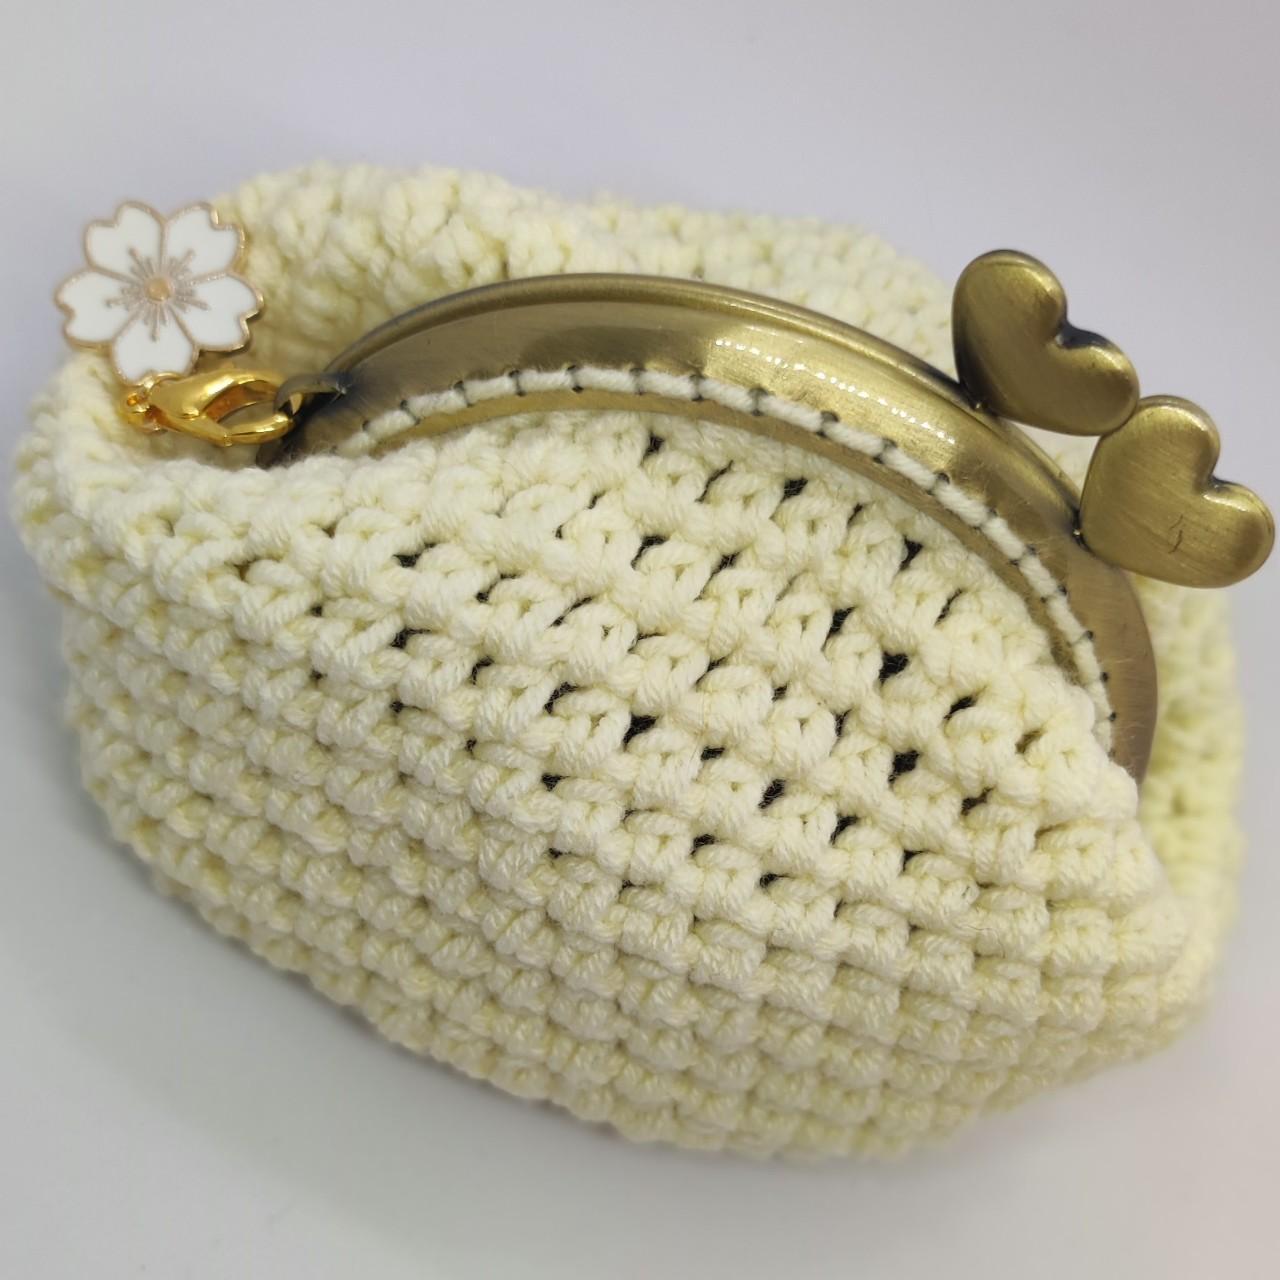 Vintage-Inspired Coin Purse Crochet Pattern by Darling Jadore